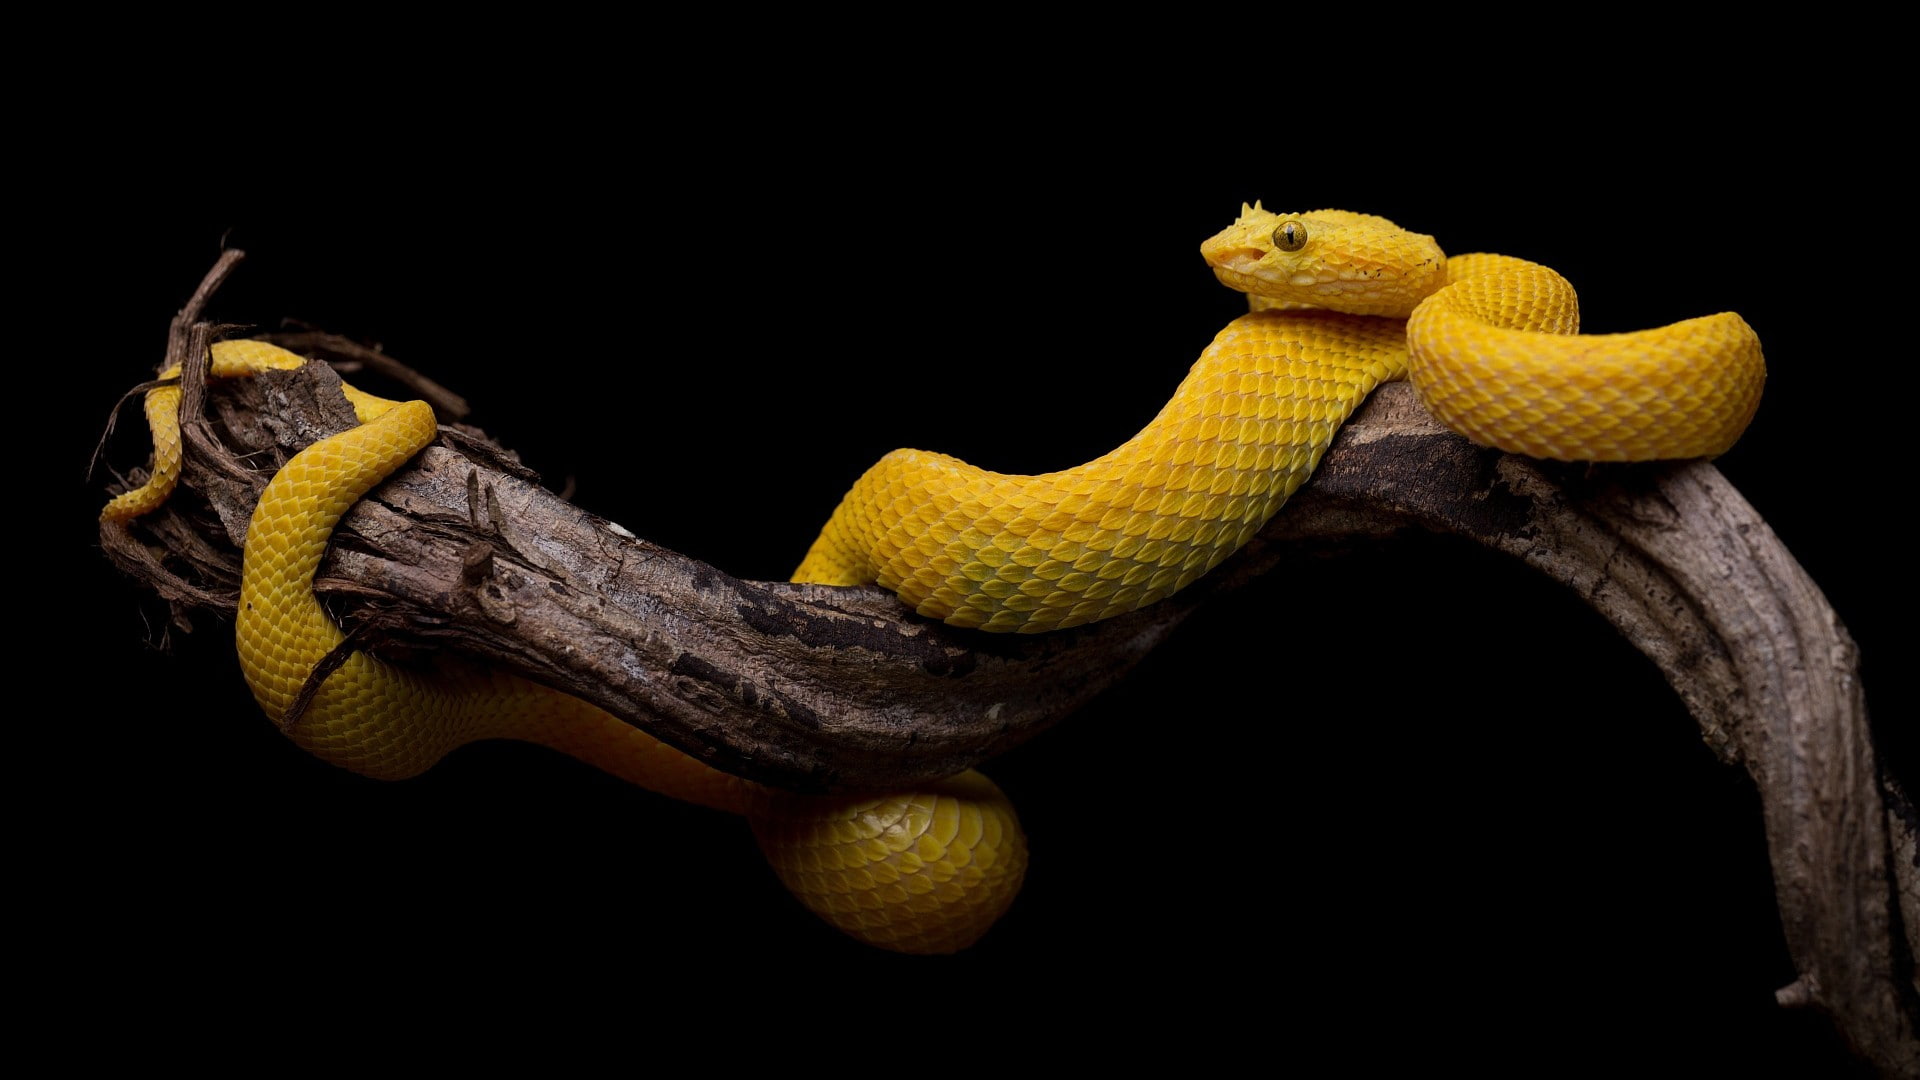 yellow, snake, branch, black background, reptiles, animals